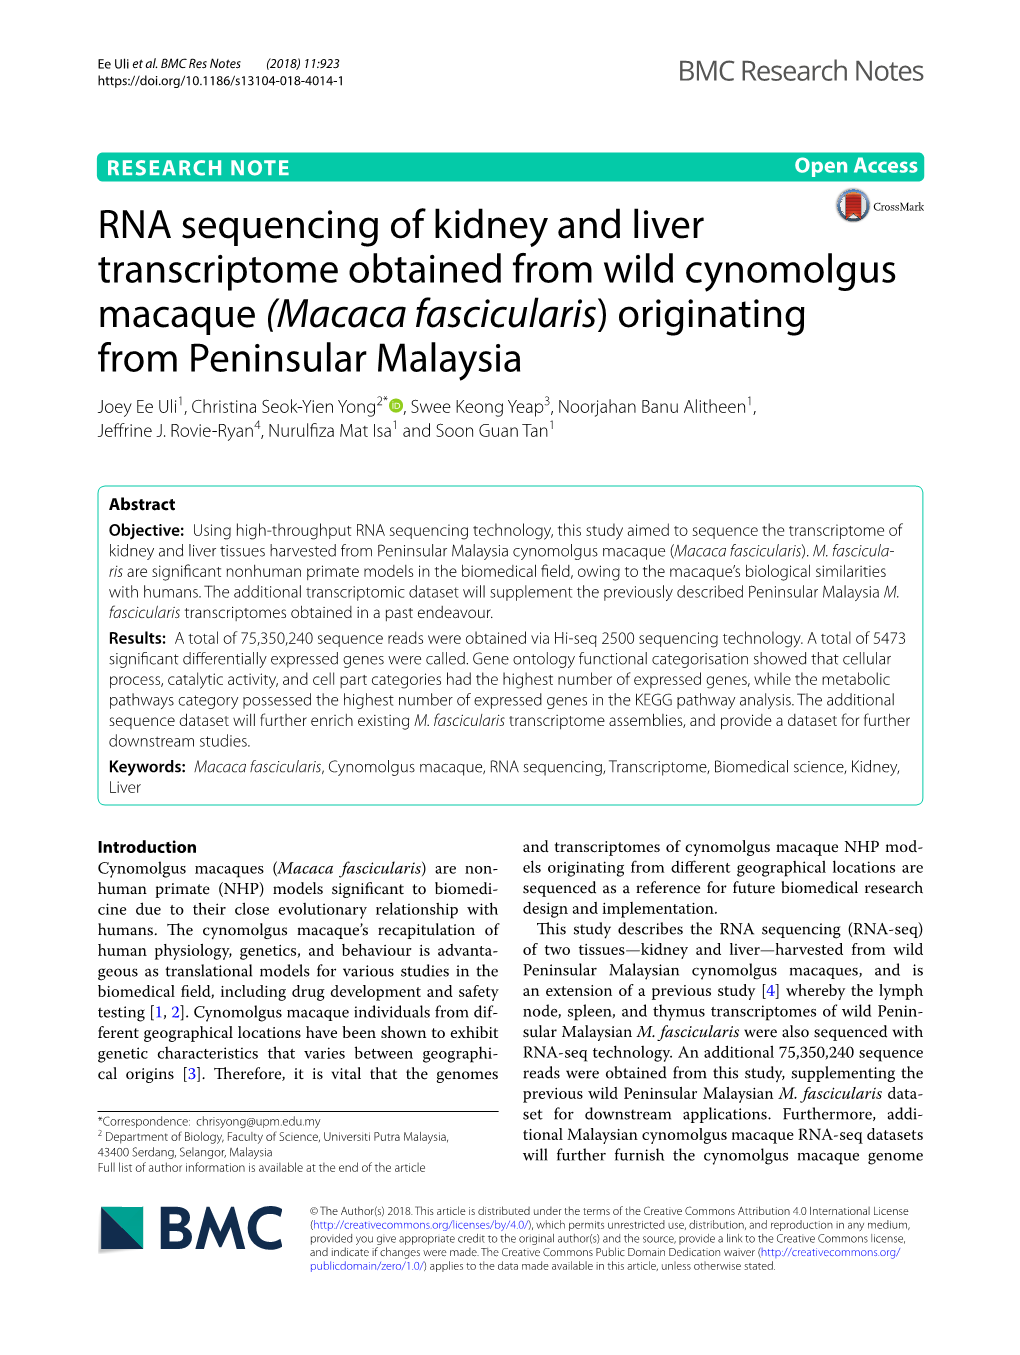 RNA Sequencing of Kidney and Liver Transcriptome Obtained from Wild